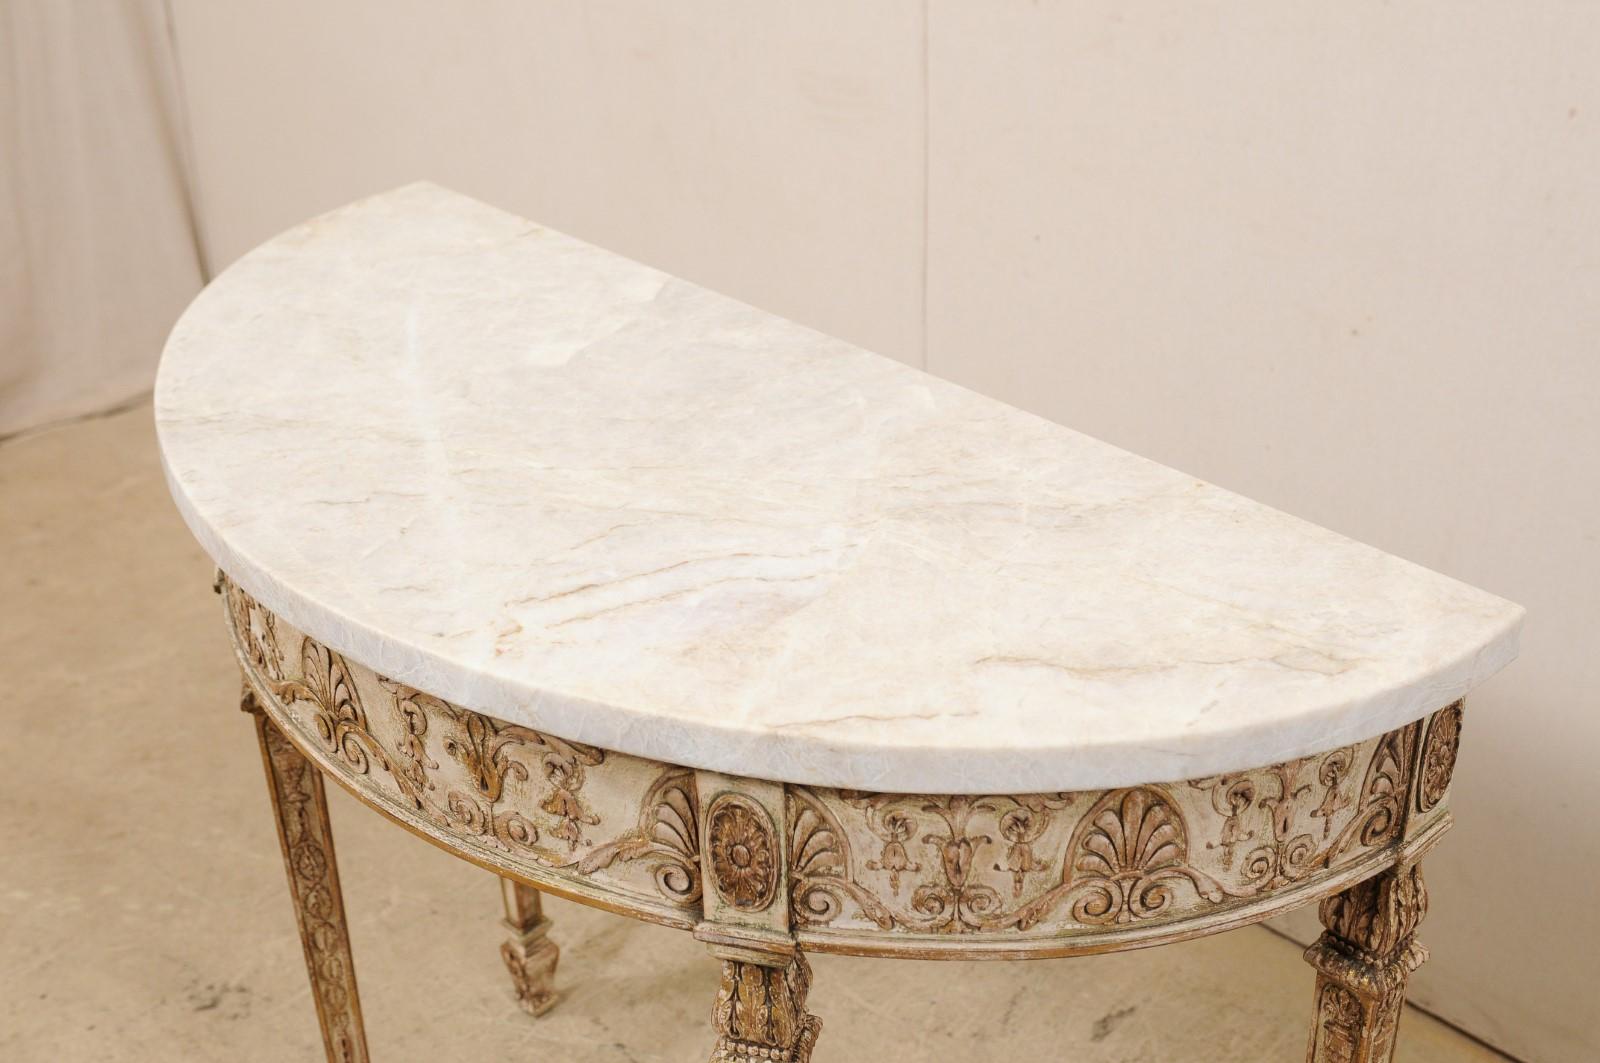 American Antique Italian-Style Demilune Table with Nicely Carved Accents & New Marble Top